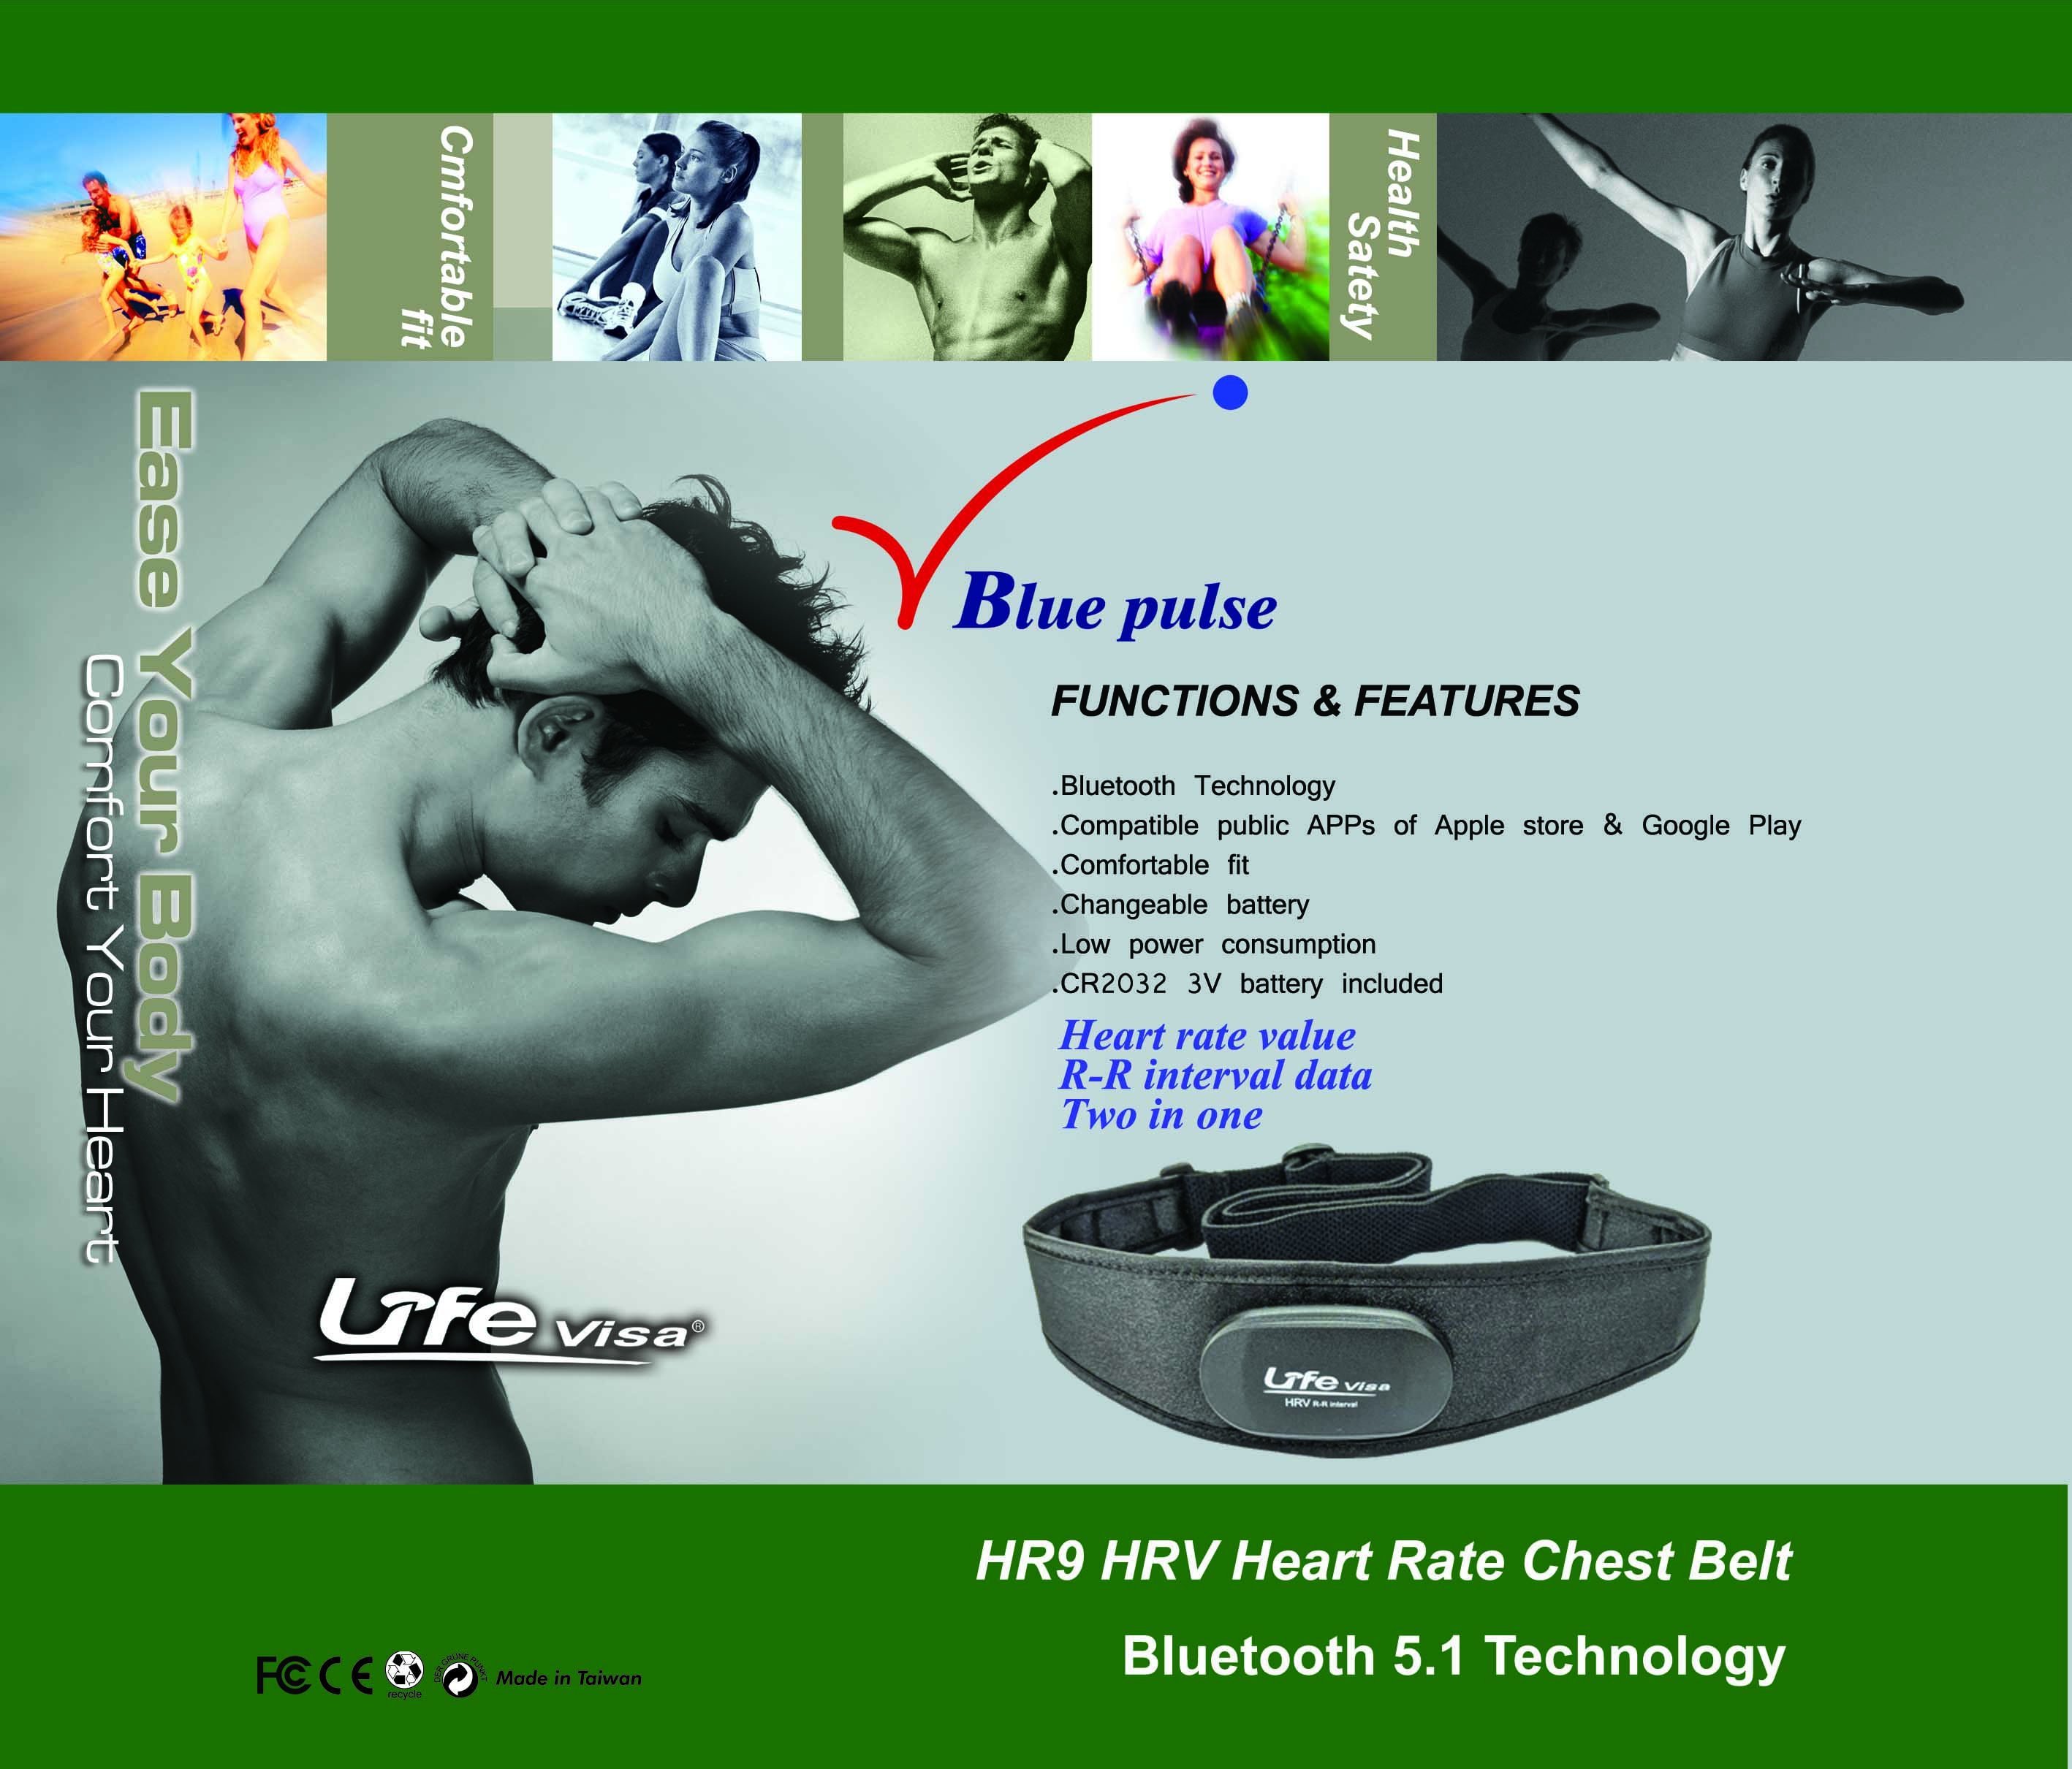 HRV heart rate monitor with link indicator,Bluetooth heart rate monitor,heart rate monitor,Biotronic pulse heart rate monitor, Bluetooth heart rate monitor,g.pulse heart rate monitor,G.PULSE 3 in 1,3 in 1 heart rate,three mode heart rate monitor